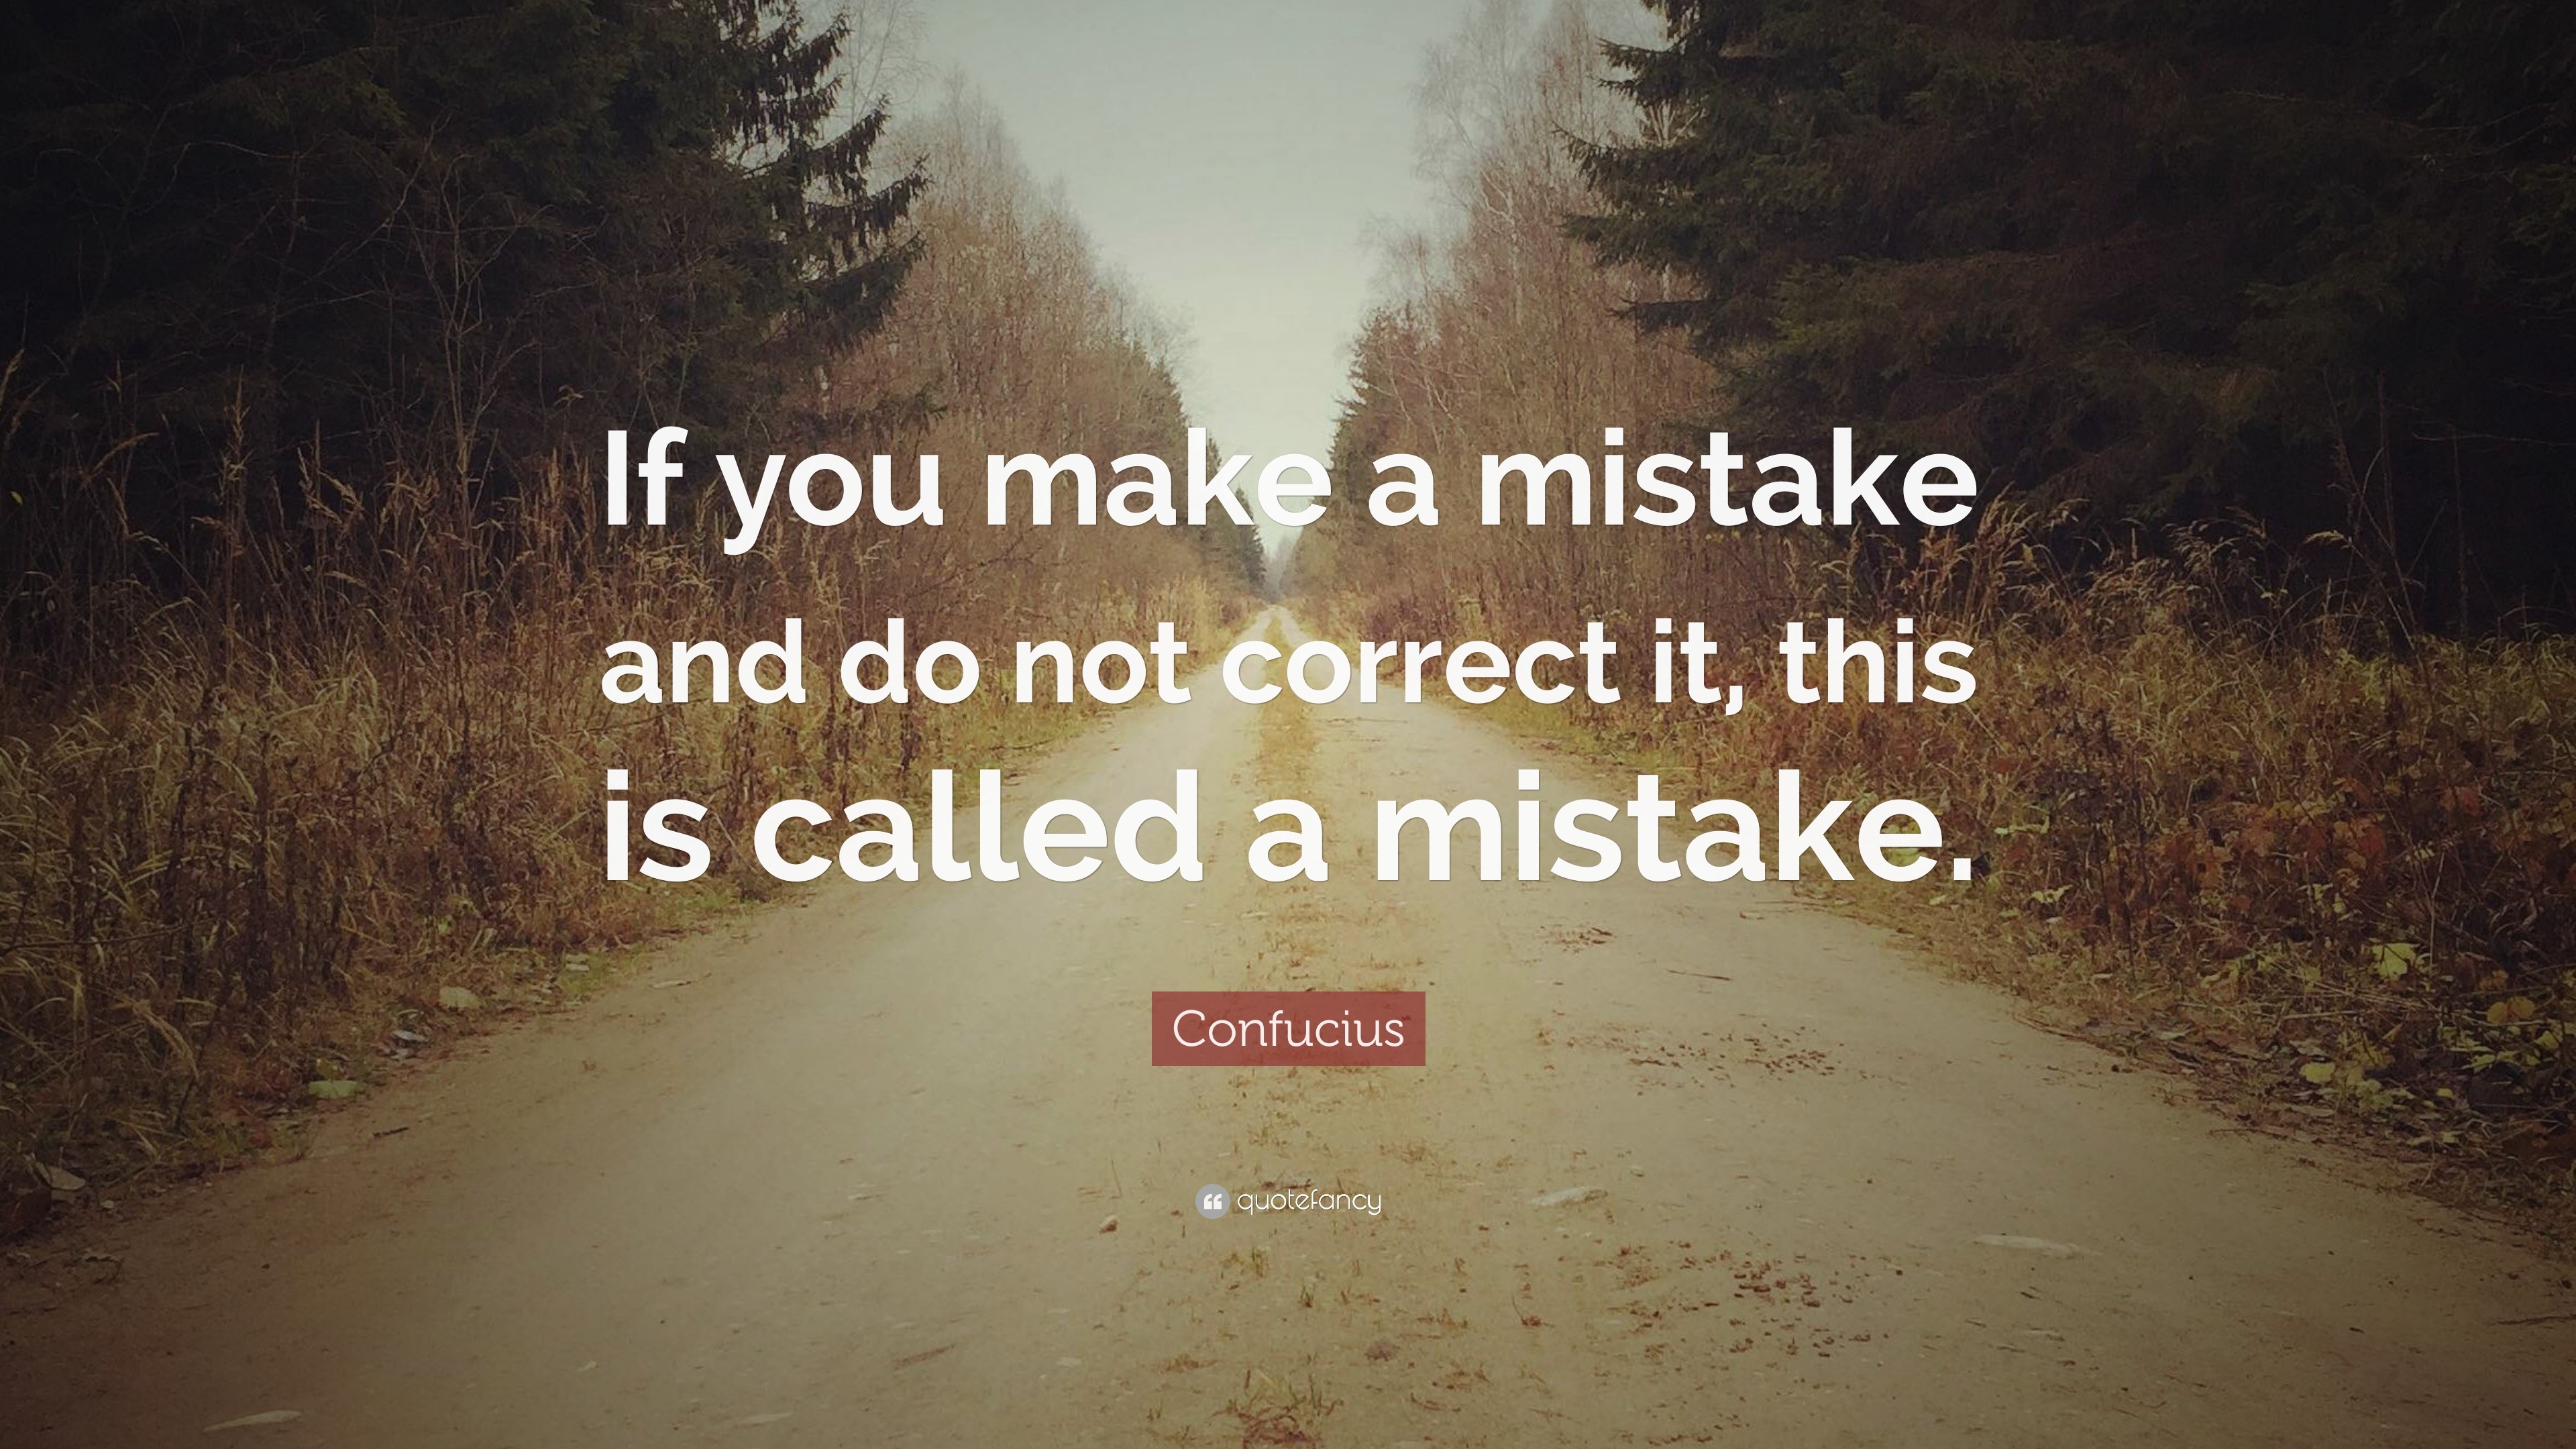 Confucius Quote: “If you make a mistake and do not correct it, this is